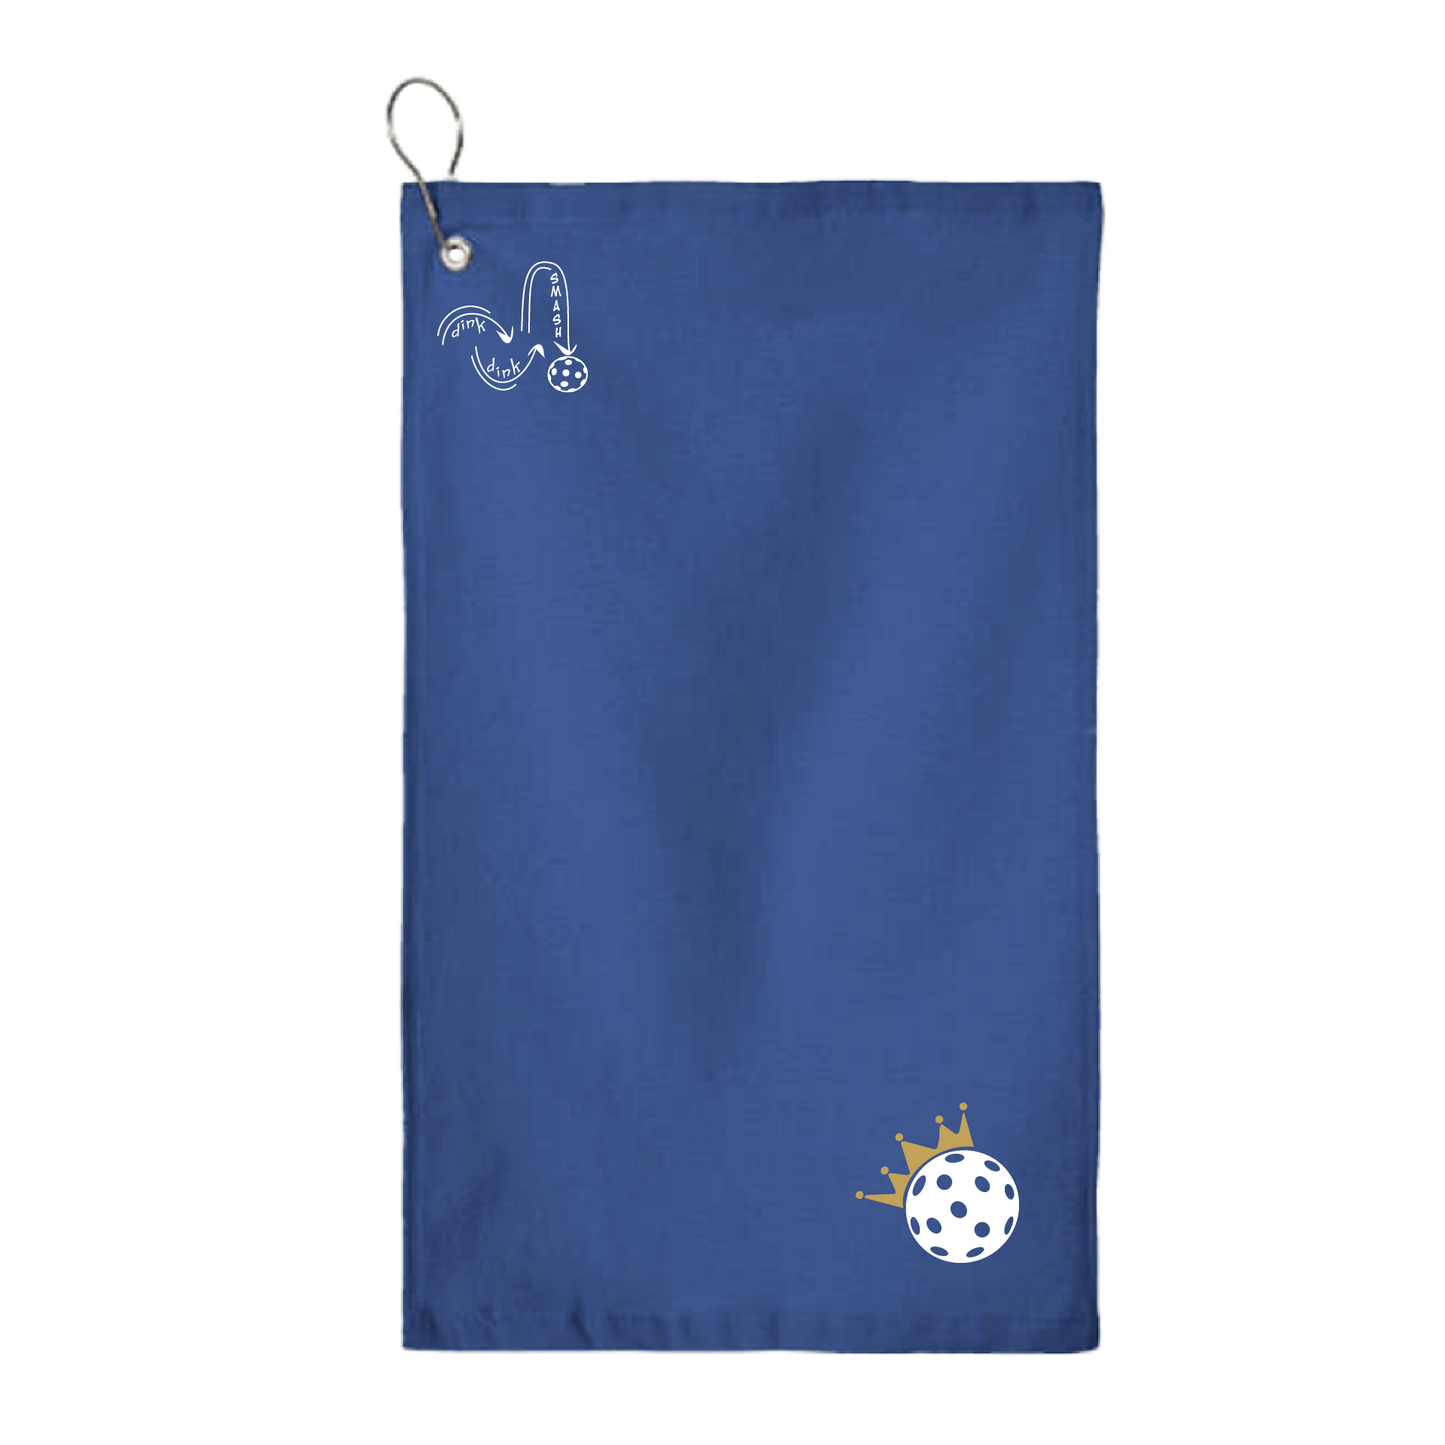 This Pickleball with Queen Crown towel is crafted with cotton terry velour for optimal performance. It features grommets, hooks, and hemmed edges for added durability. It's perfect for completing your pickleball gear, and an ideal gift for friends and tournaments. The towel is designed to be both absorbent and lightweight, so you can remain dry and comfortable while you play.